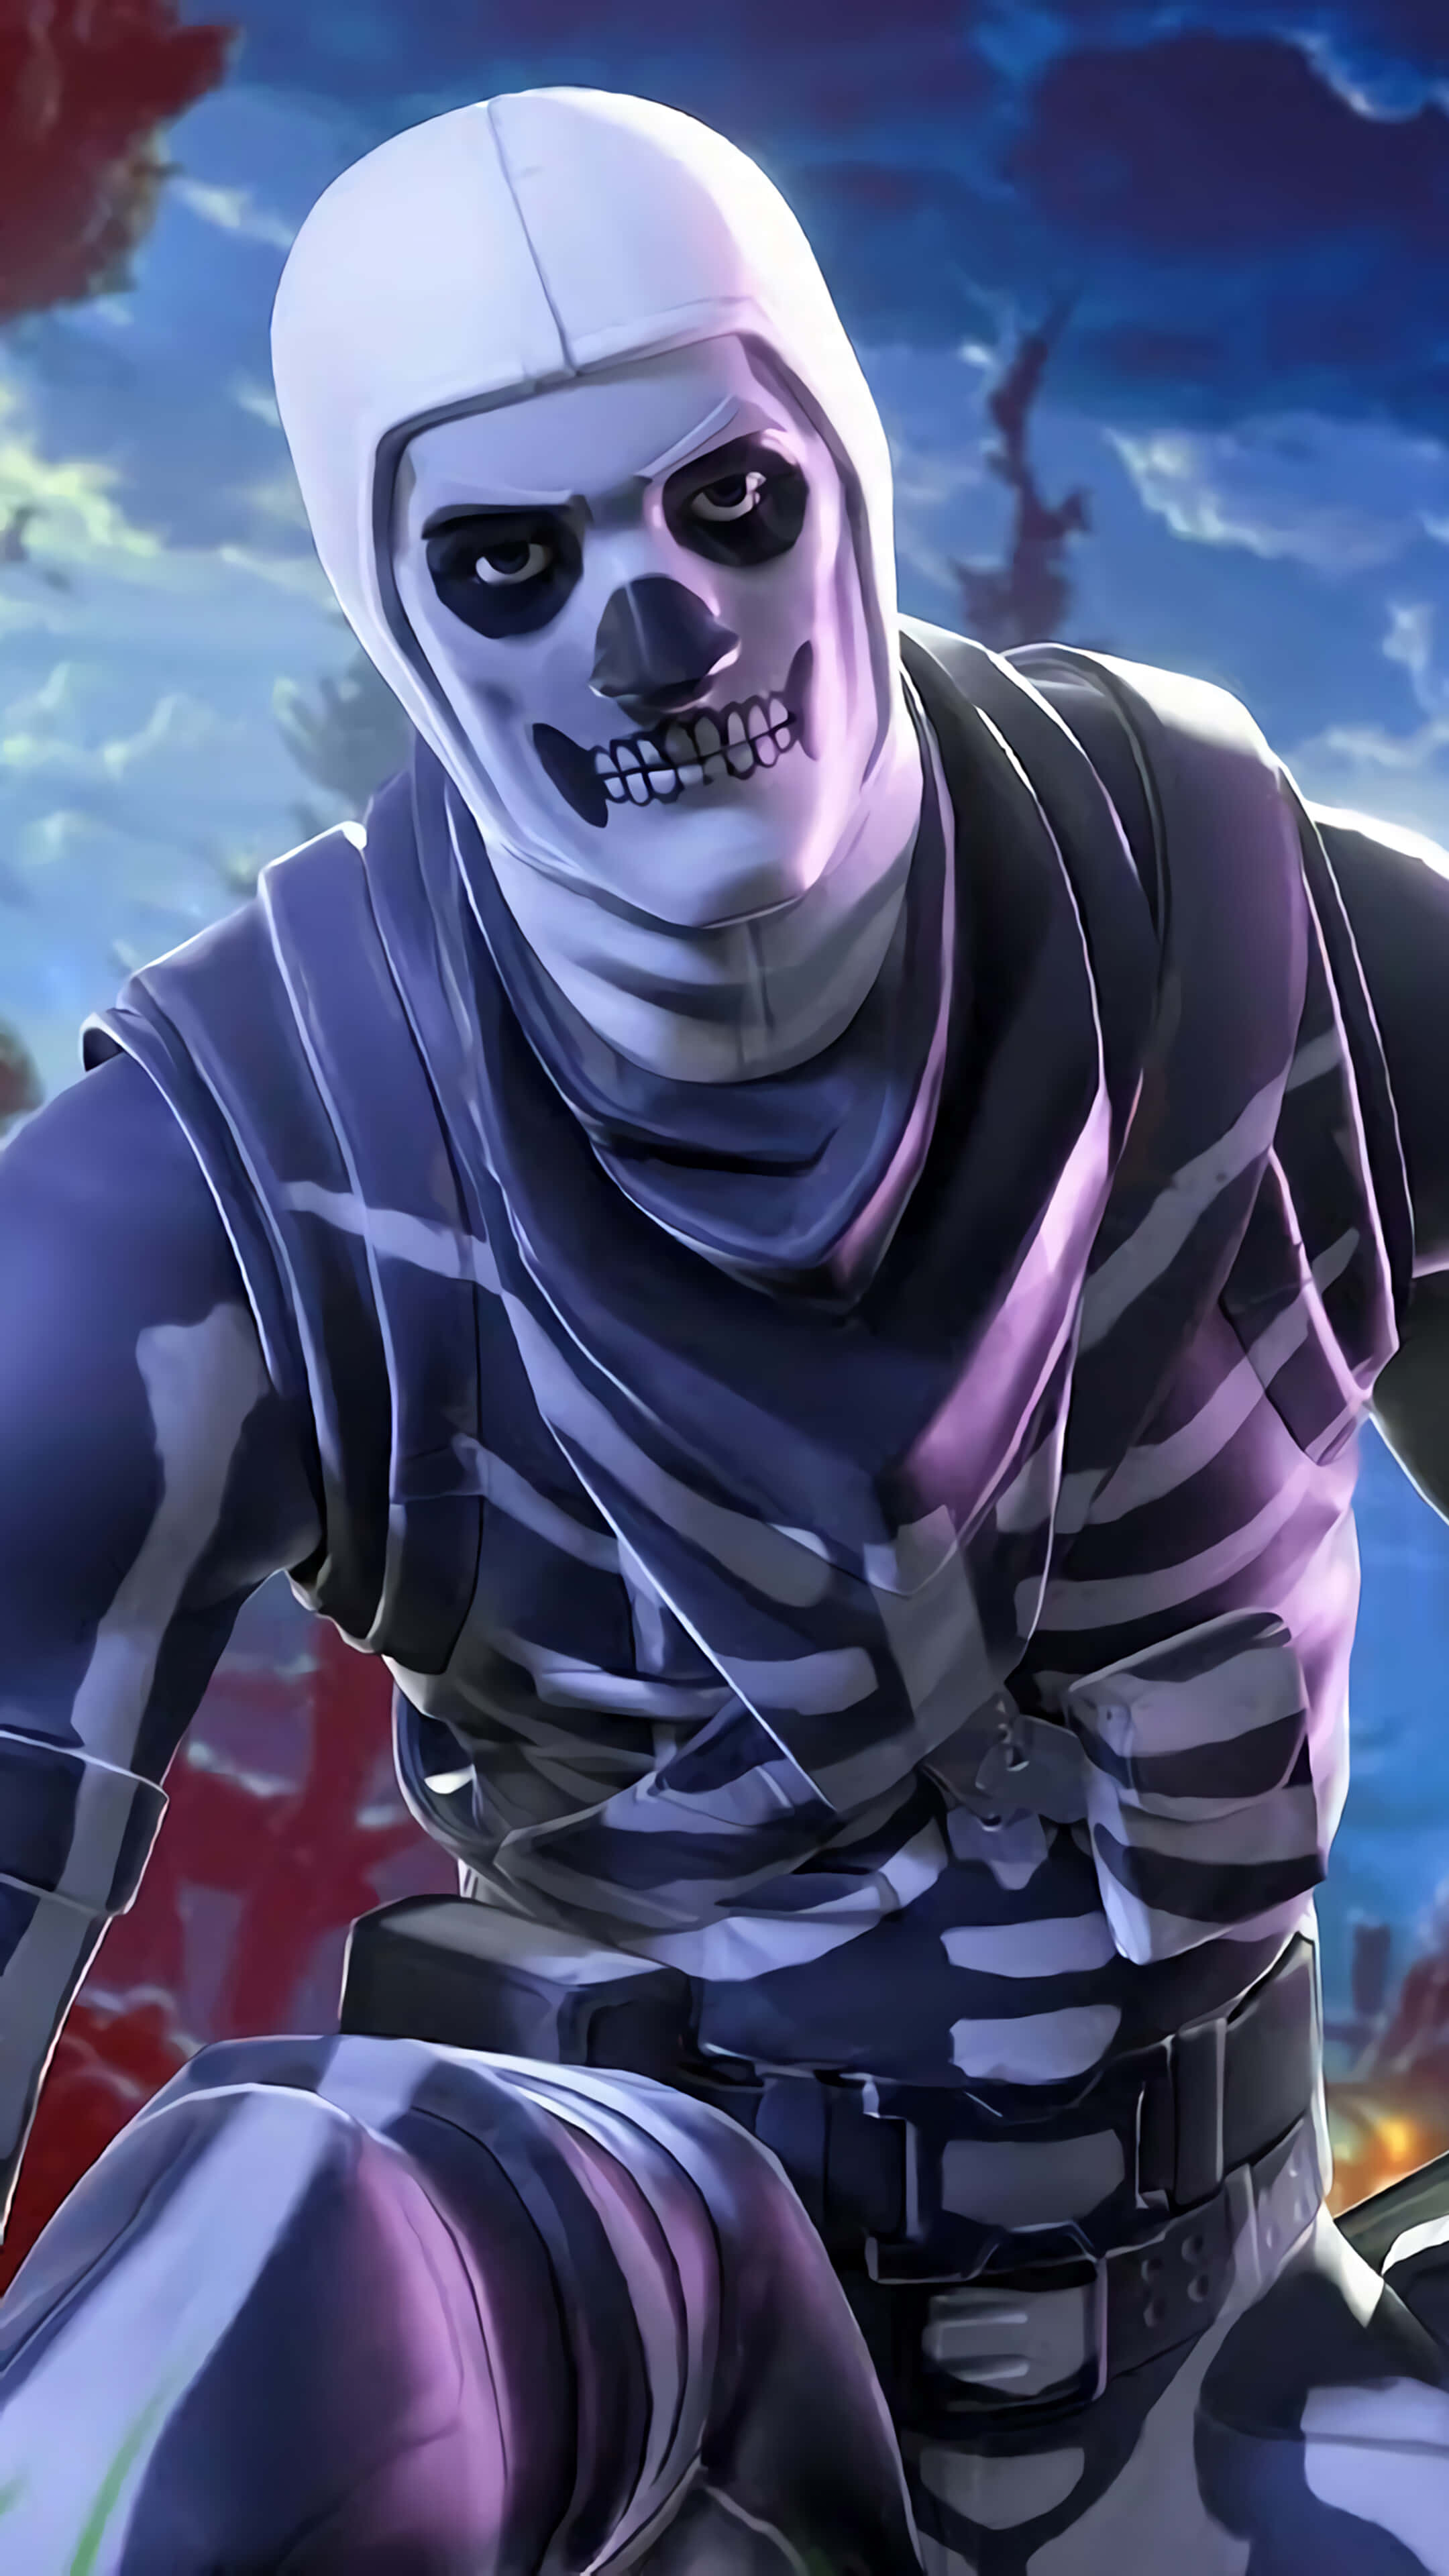 "Unlock your bold side with the Purple Skull Trooper Outfit!" Wallpaper